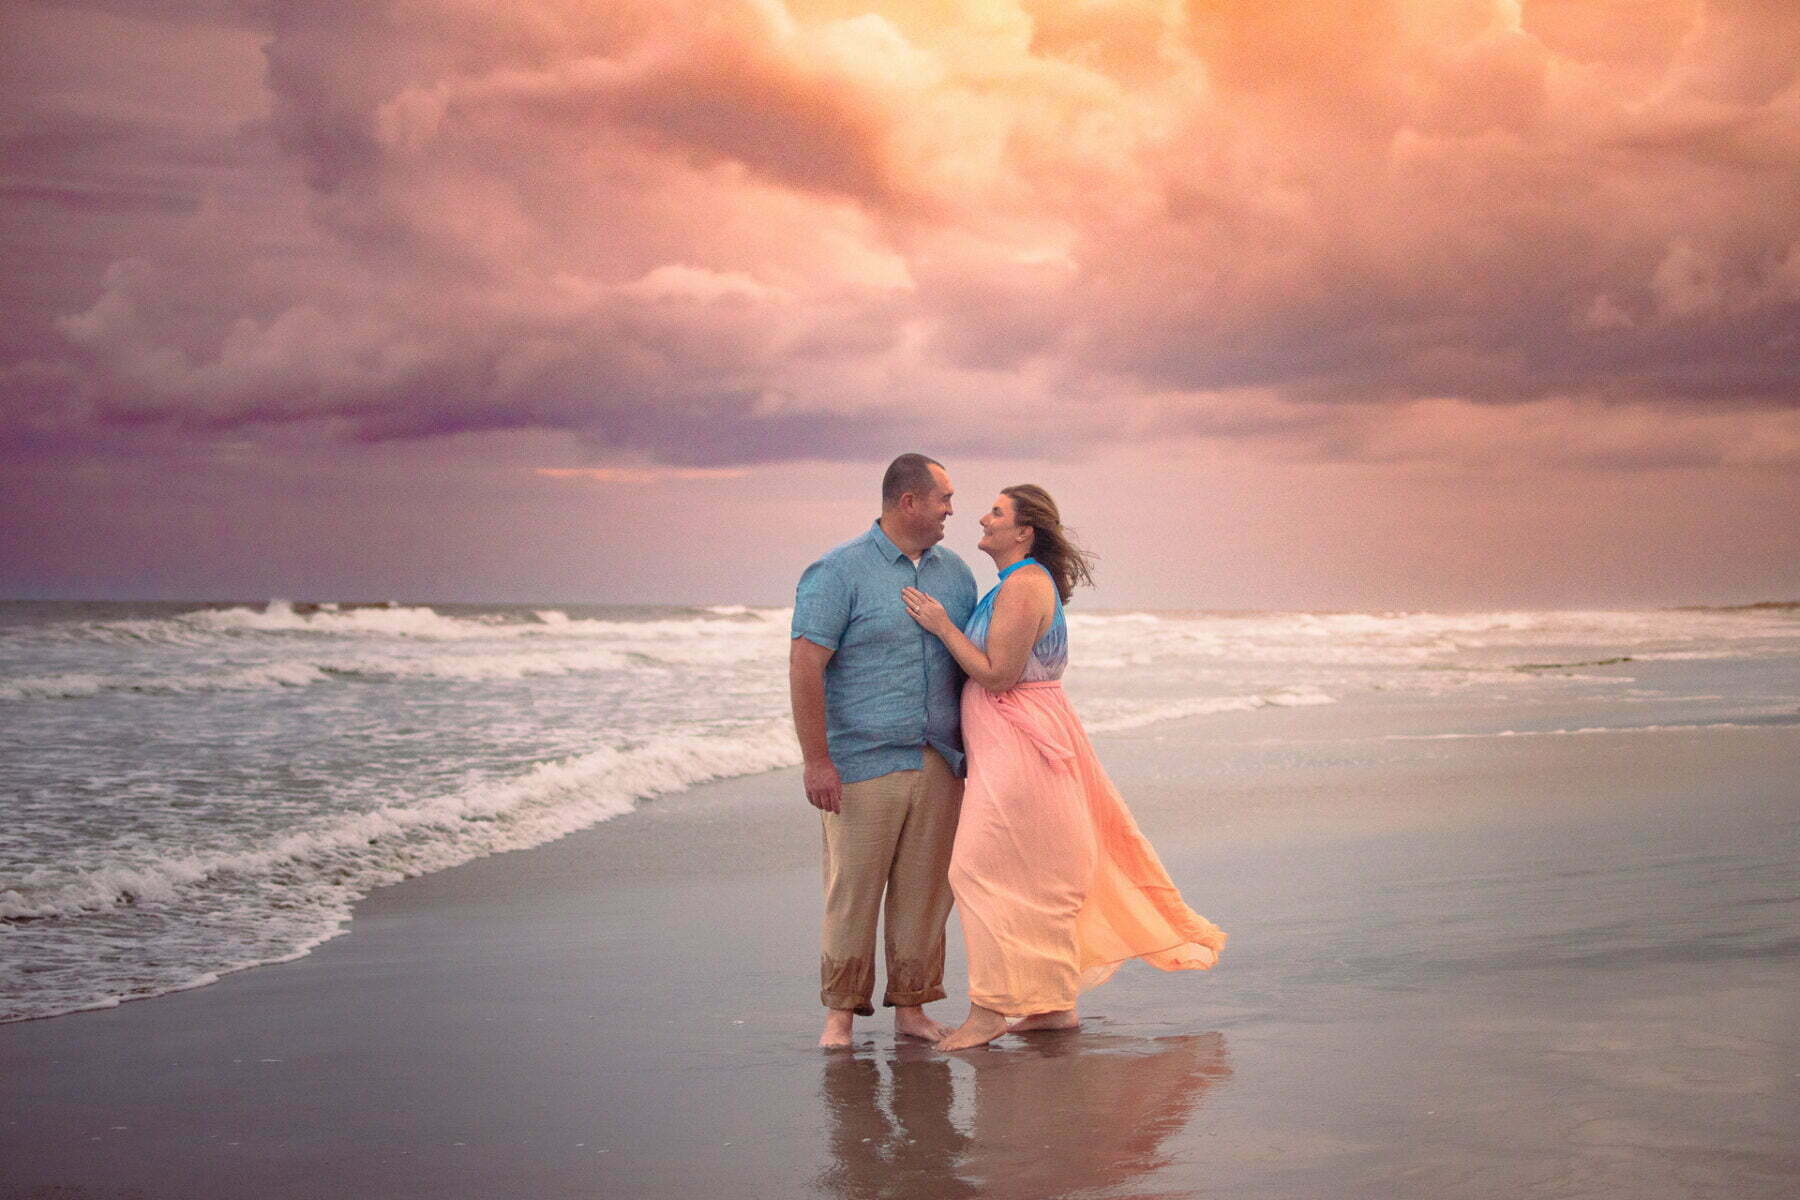 Sunset Beach colorful maternity announcement photography.